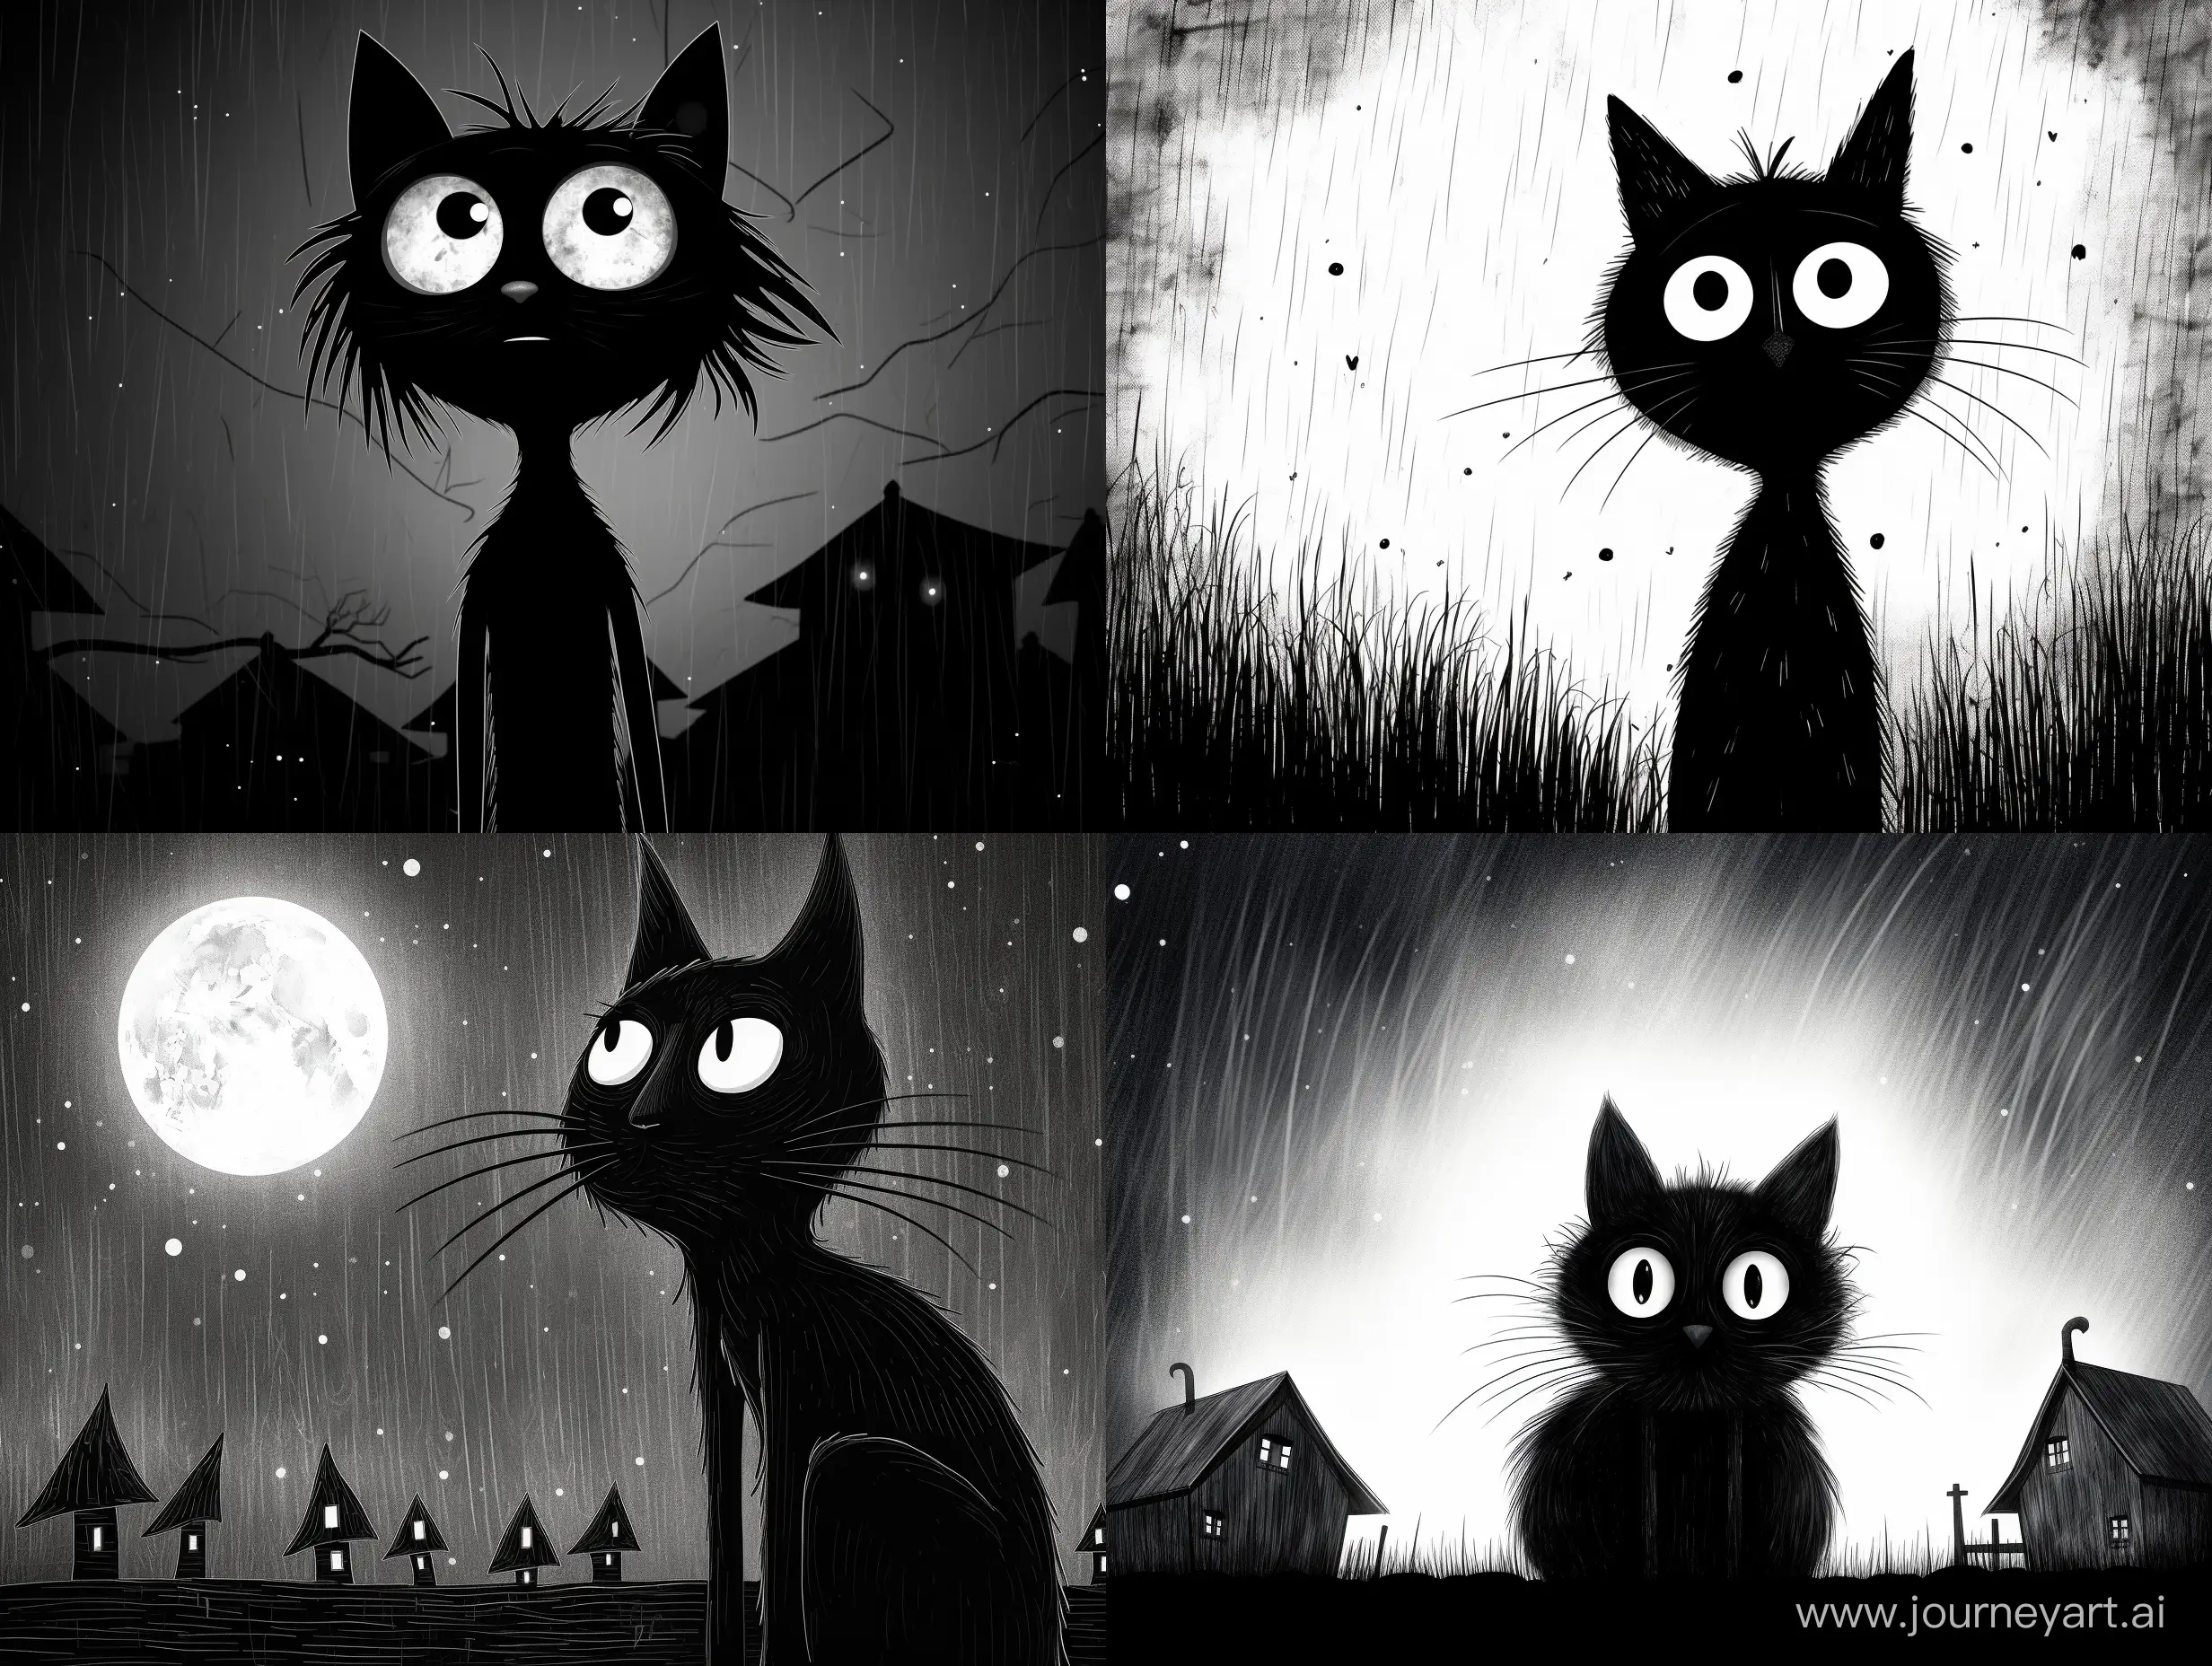 Quirky-Tim-Burton-Style-Disheveled-Black-and-White-Cats-on-Moonlit-Rooftop